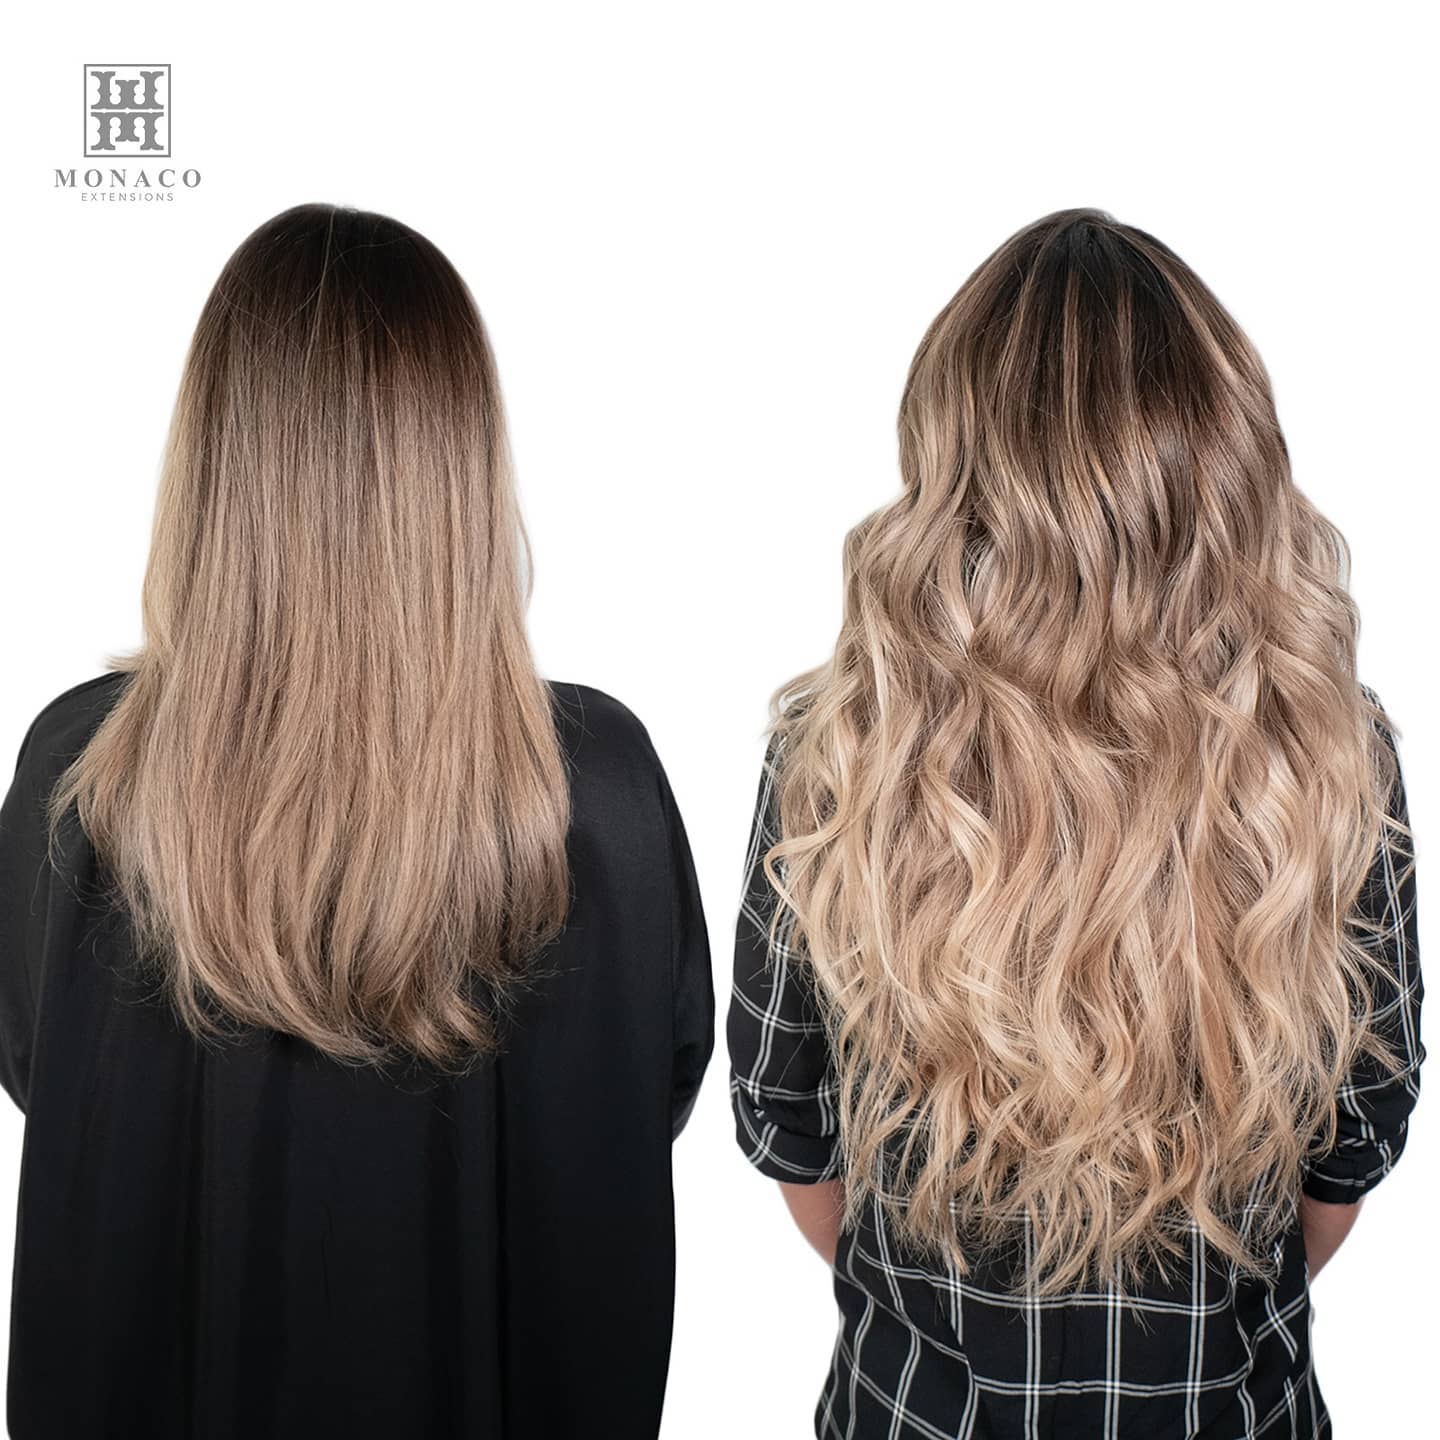 The surprising results ince you apply and style hair extensions. Clip in hair extensions before and after